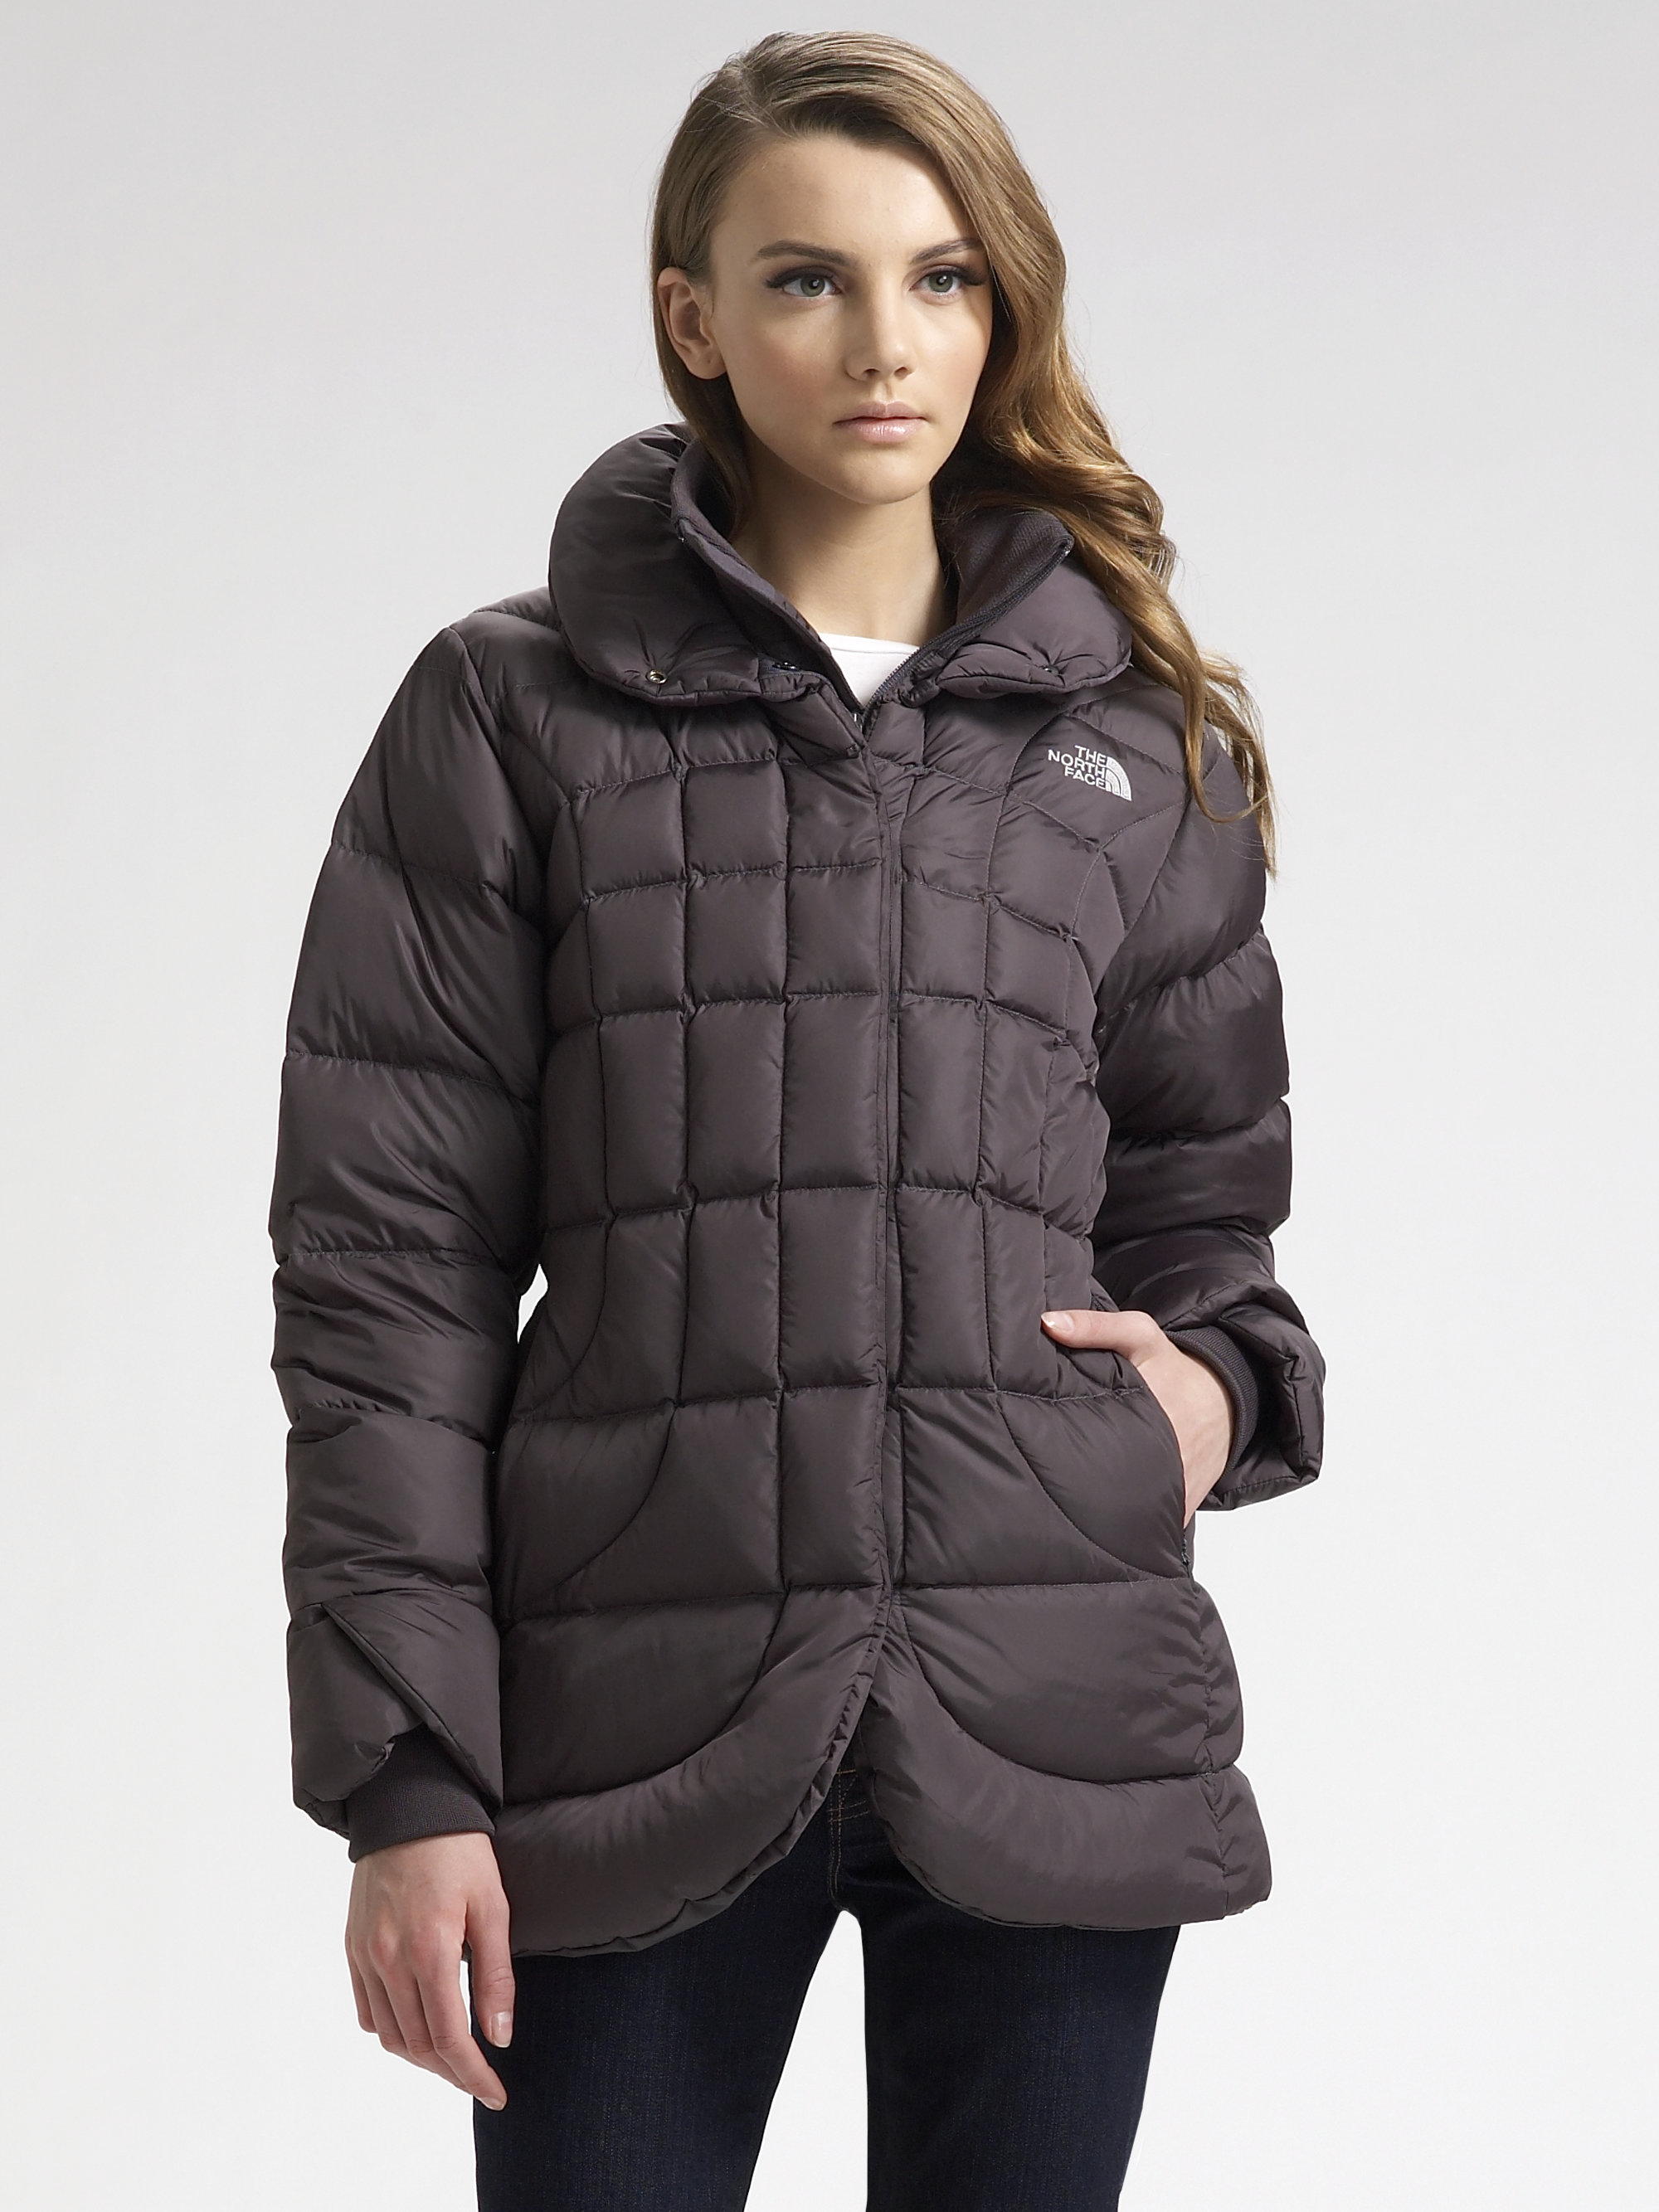 Lyst - The North Face Quilted Puffer Jacket in Gray